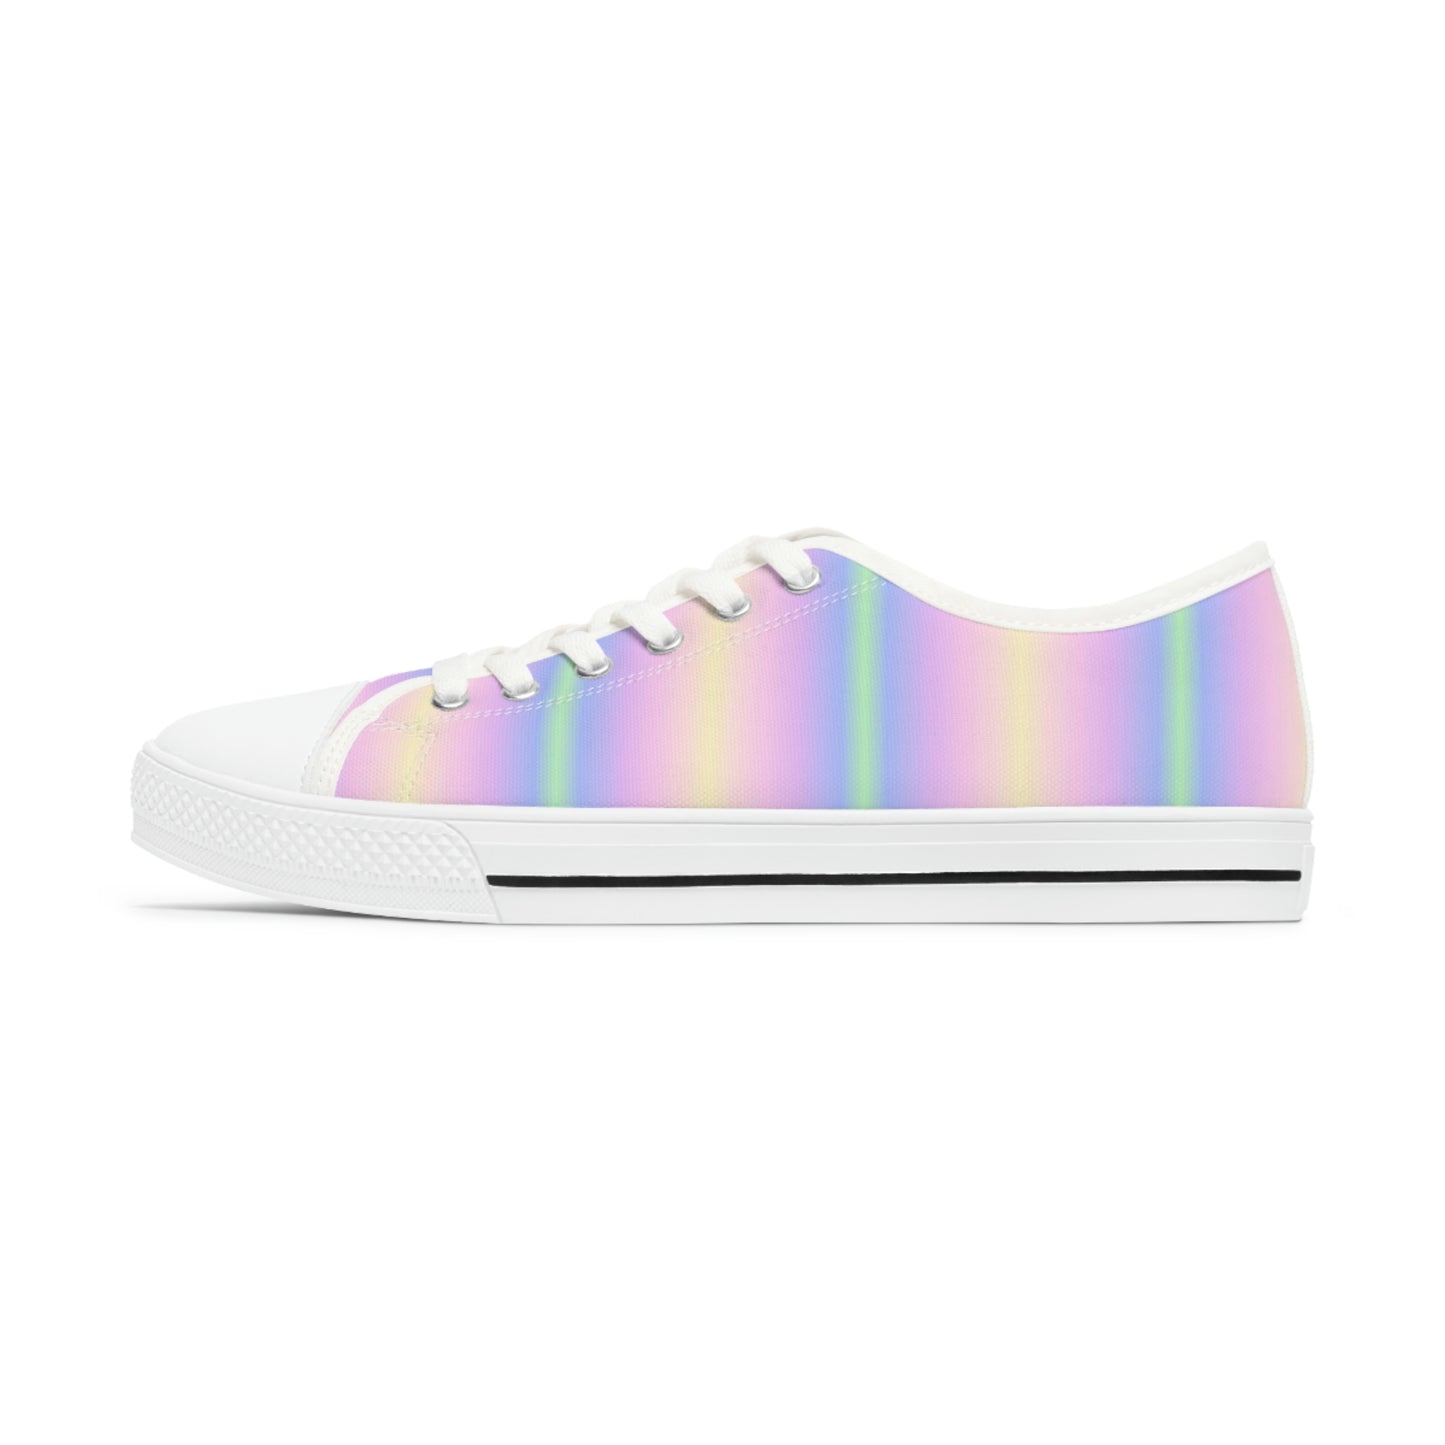 Pastel Rainbow Women Shoes, Tie Dye Ombre Gradient Sneakers Canvas White Low Top Lace Up Girls Aesthetic Flat Shoes